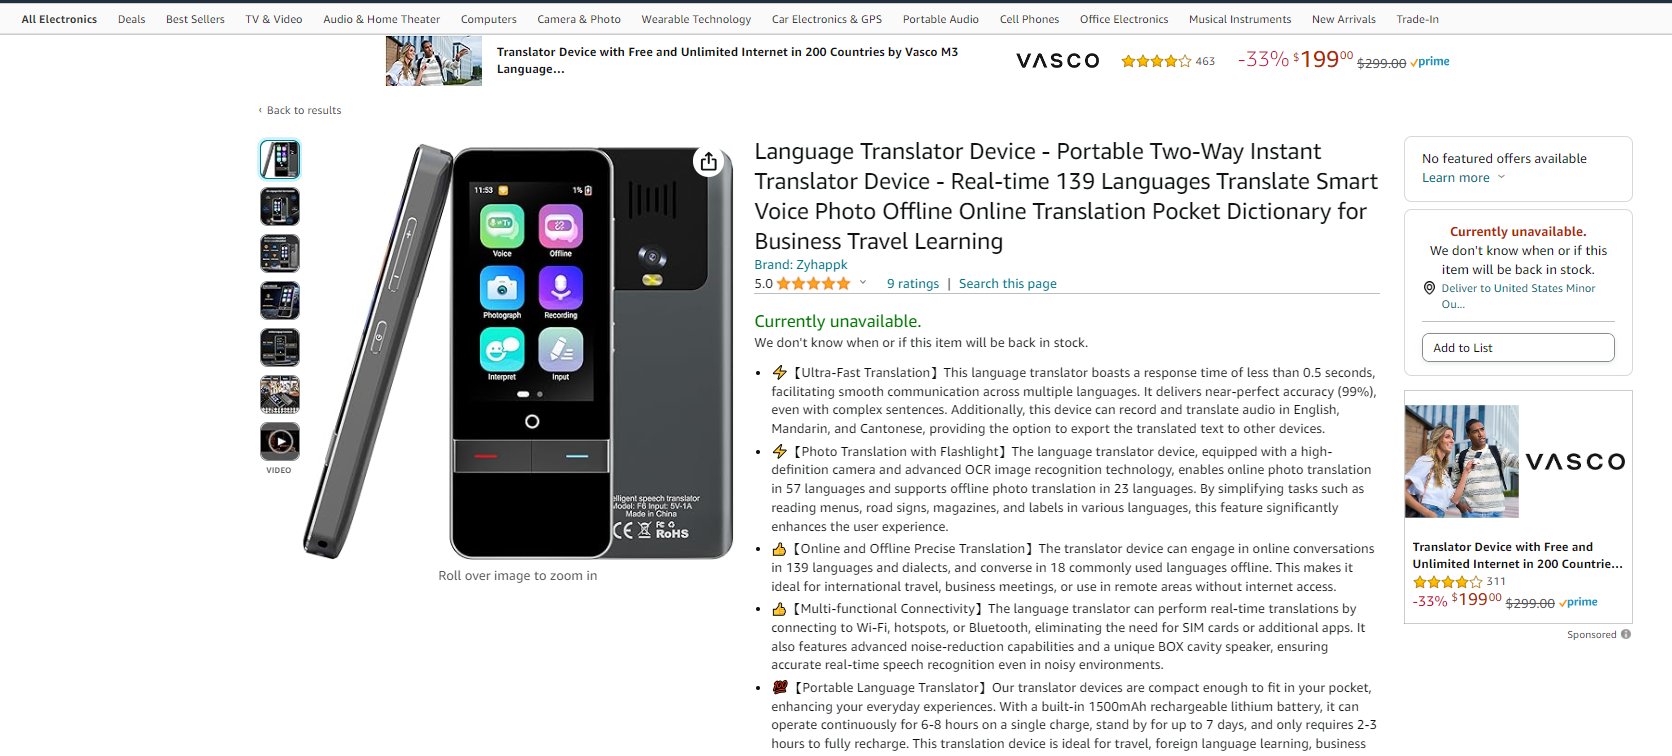 Pocket language translators are a boon for travelers, business professionals, and language learners in the globalized consumer electronics market. These devices are indispensable for effective communication across languages.